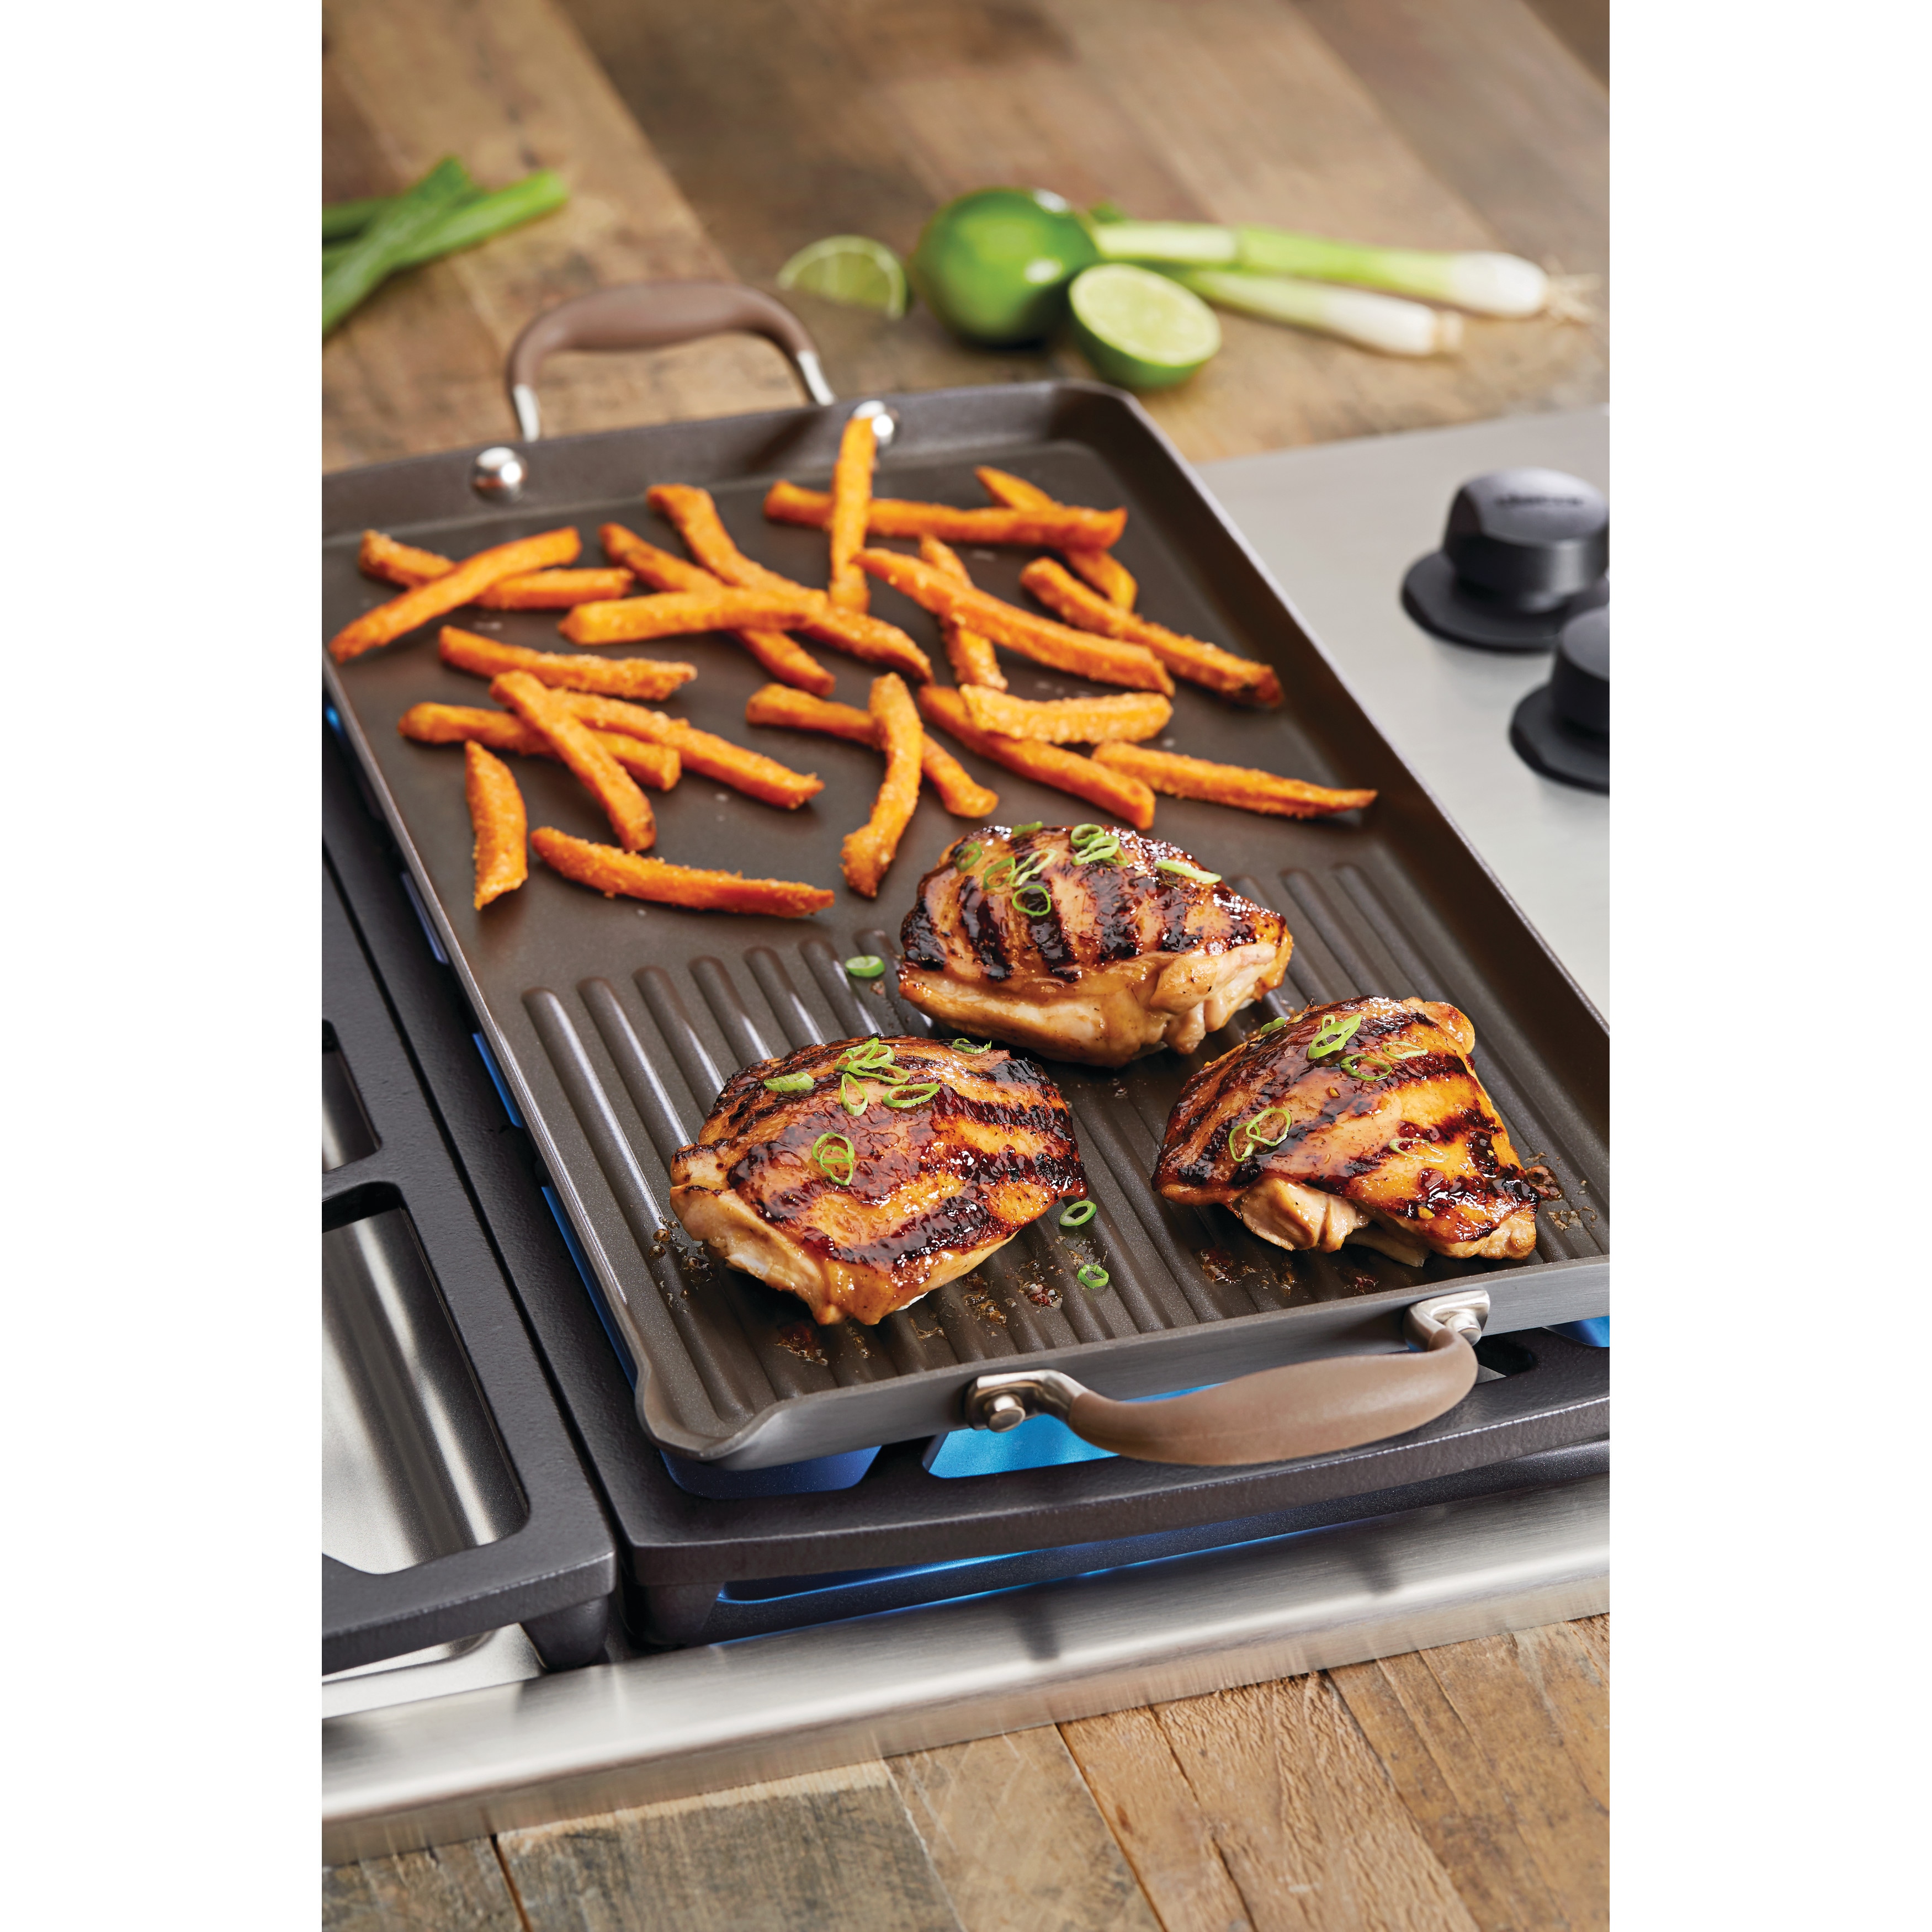 Top Product Reviews for Anolon Advanced Bronze Hard-Anodized Nonstick 10- Inch x 18-Inch Double Burner Griddle and Grill Pan with Pour Spout  13218506 Bed Bath  Beyond